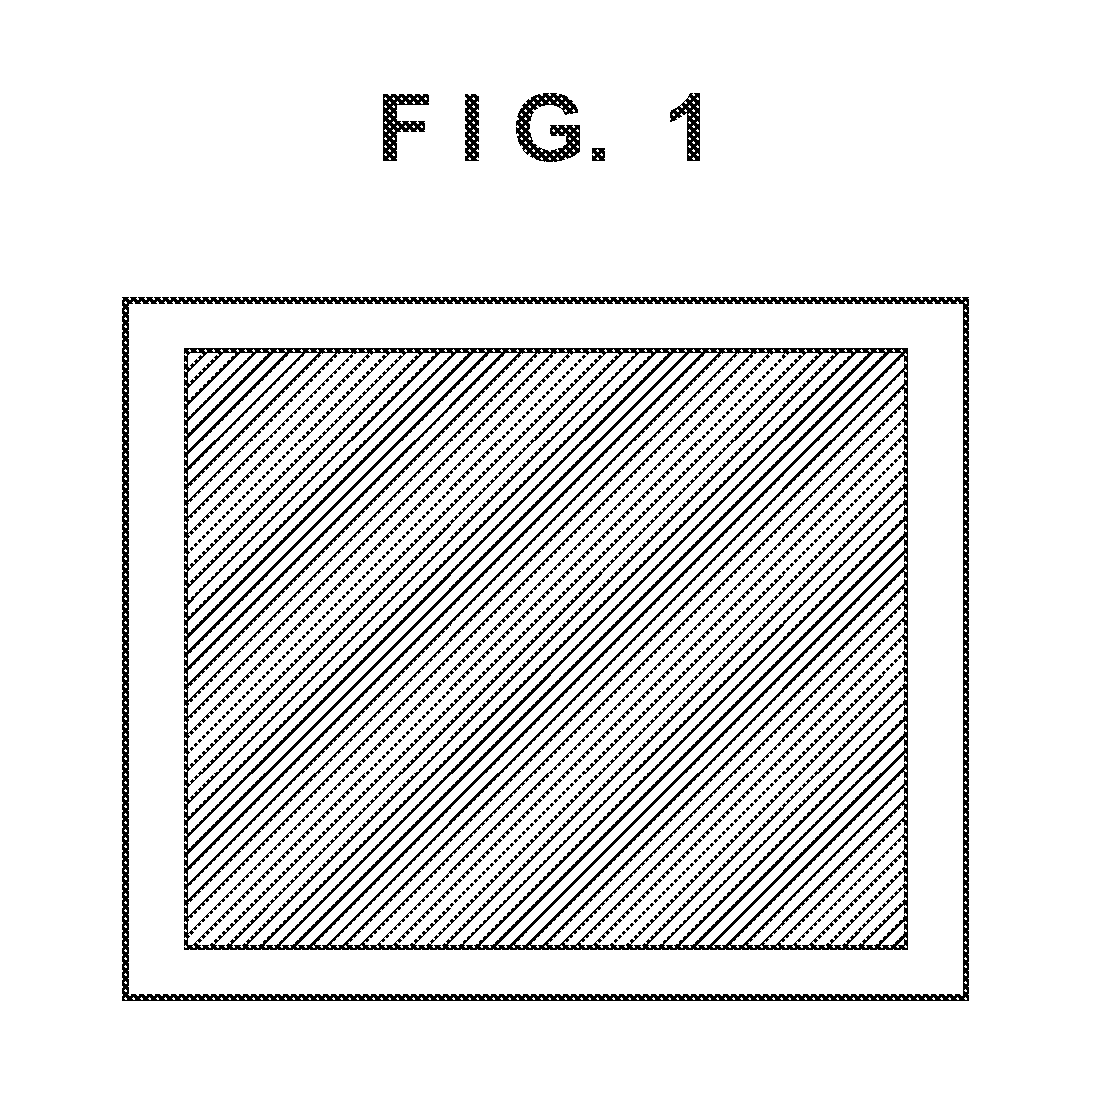 Image quality evaluation apparatus and method of controlling the same